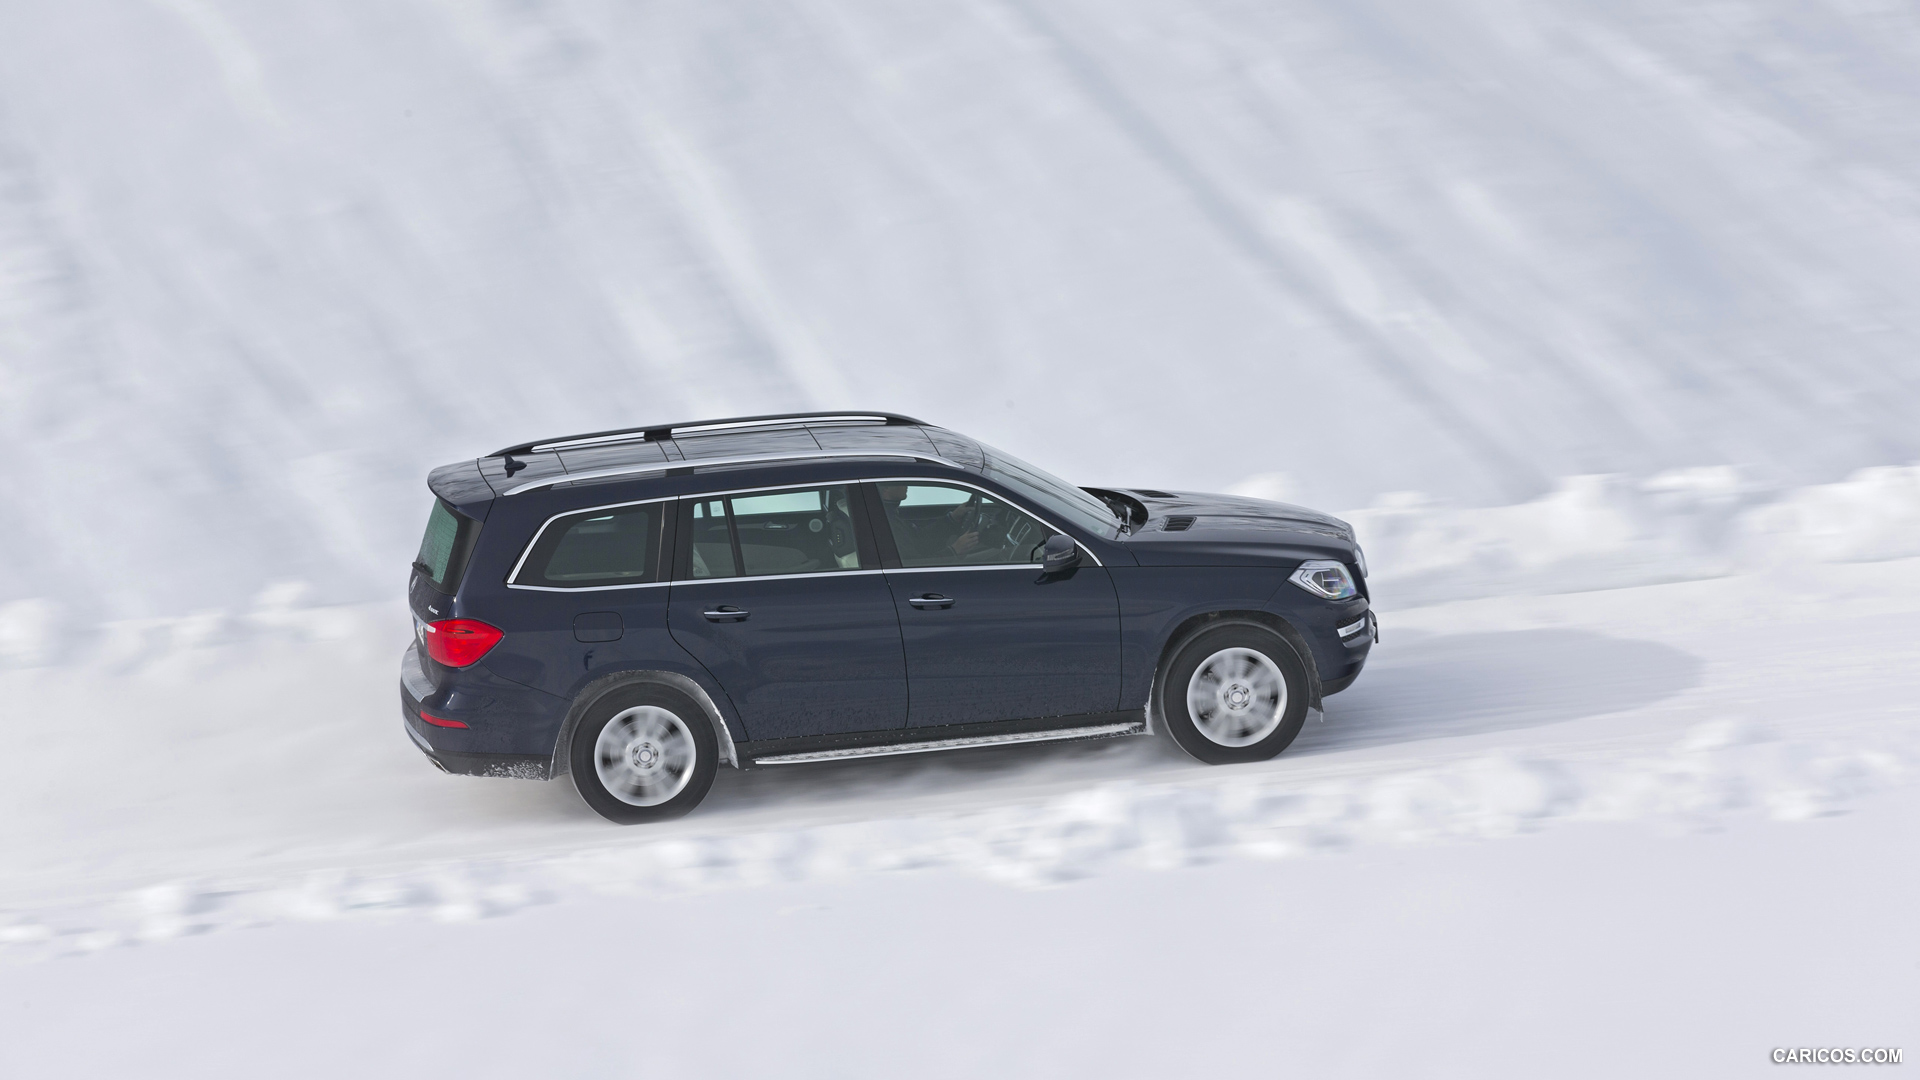 2013 Mercedes-Benz GL 500 4MATIC on Snow - Side, #231 of 259